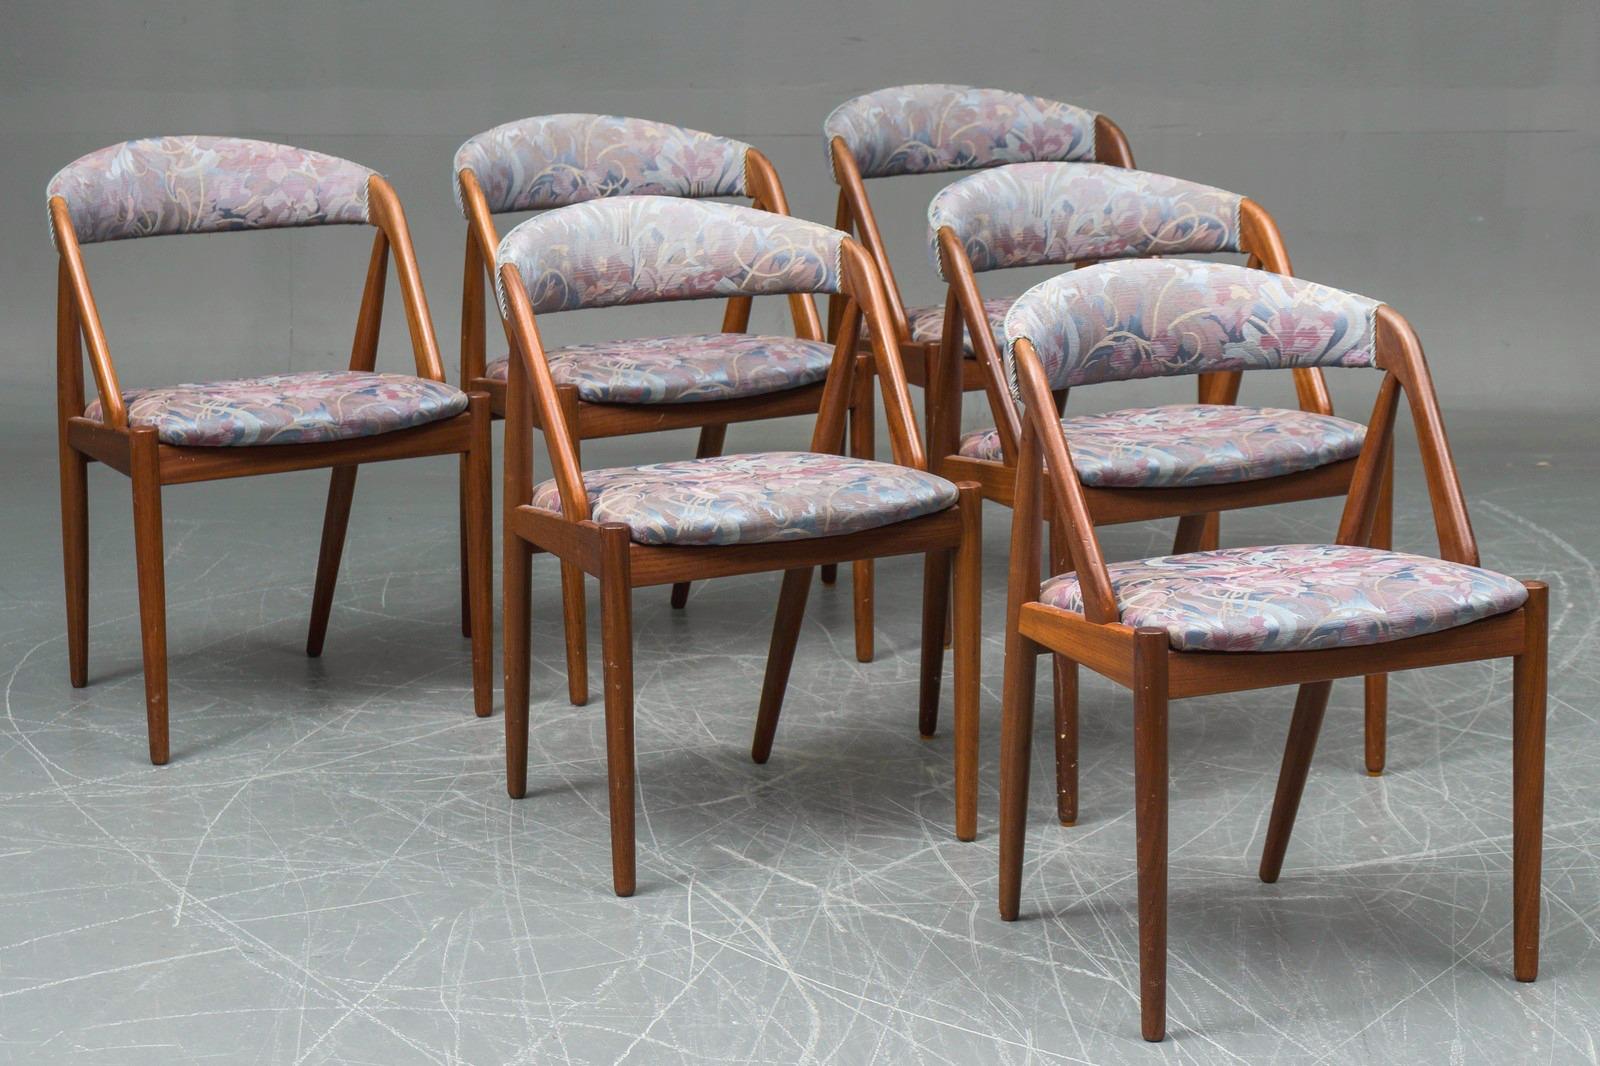 This set of three dining room chairs was designed by Kai Kristiansen in 1956 and manufactured by Schou Andersen in the 1960s in Denmark. The chairs are made from teak and upholstered in green colored wool. Beautiful frames with very nice color and